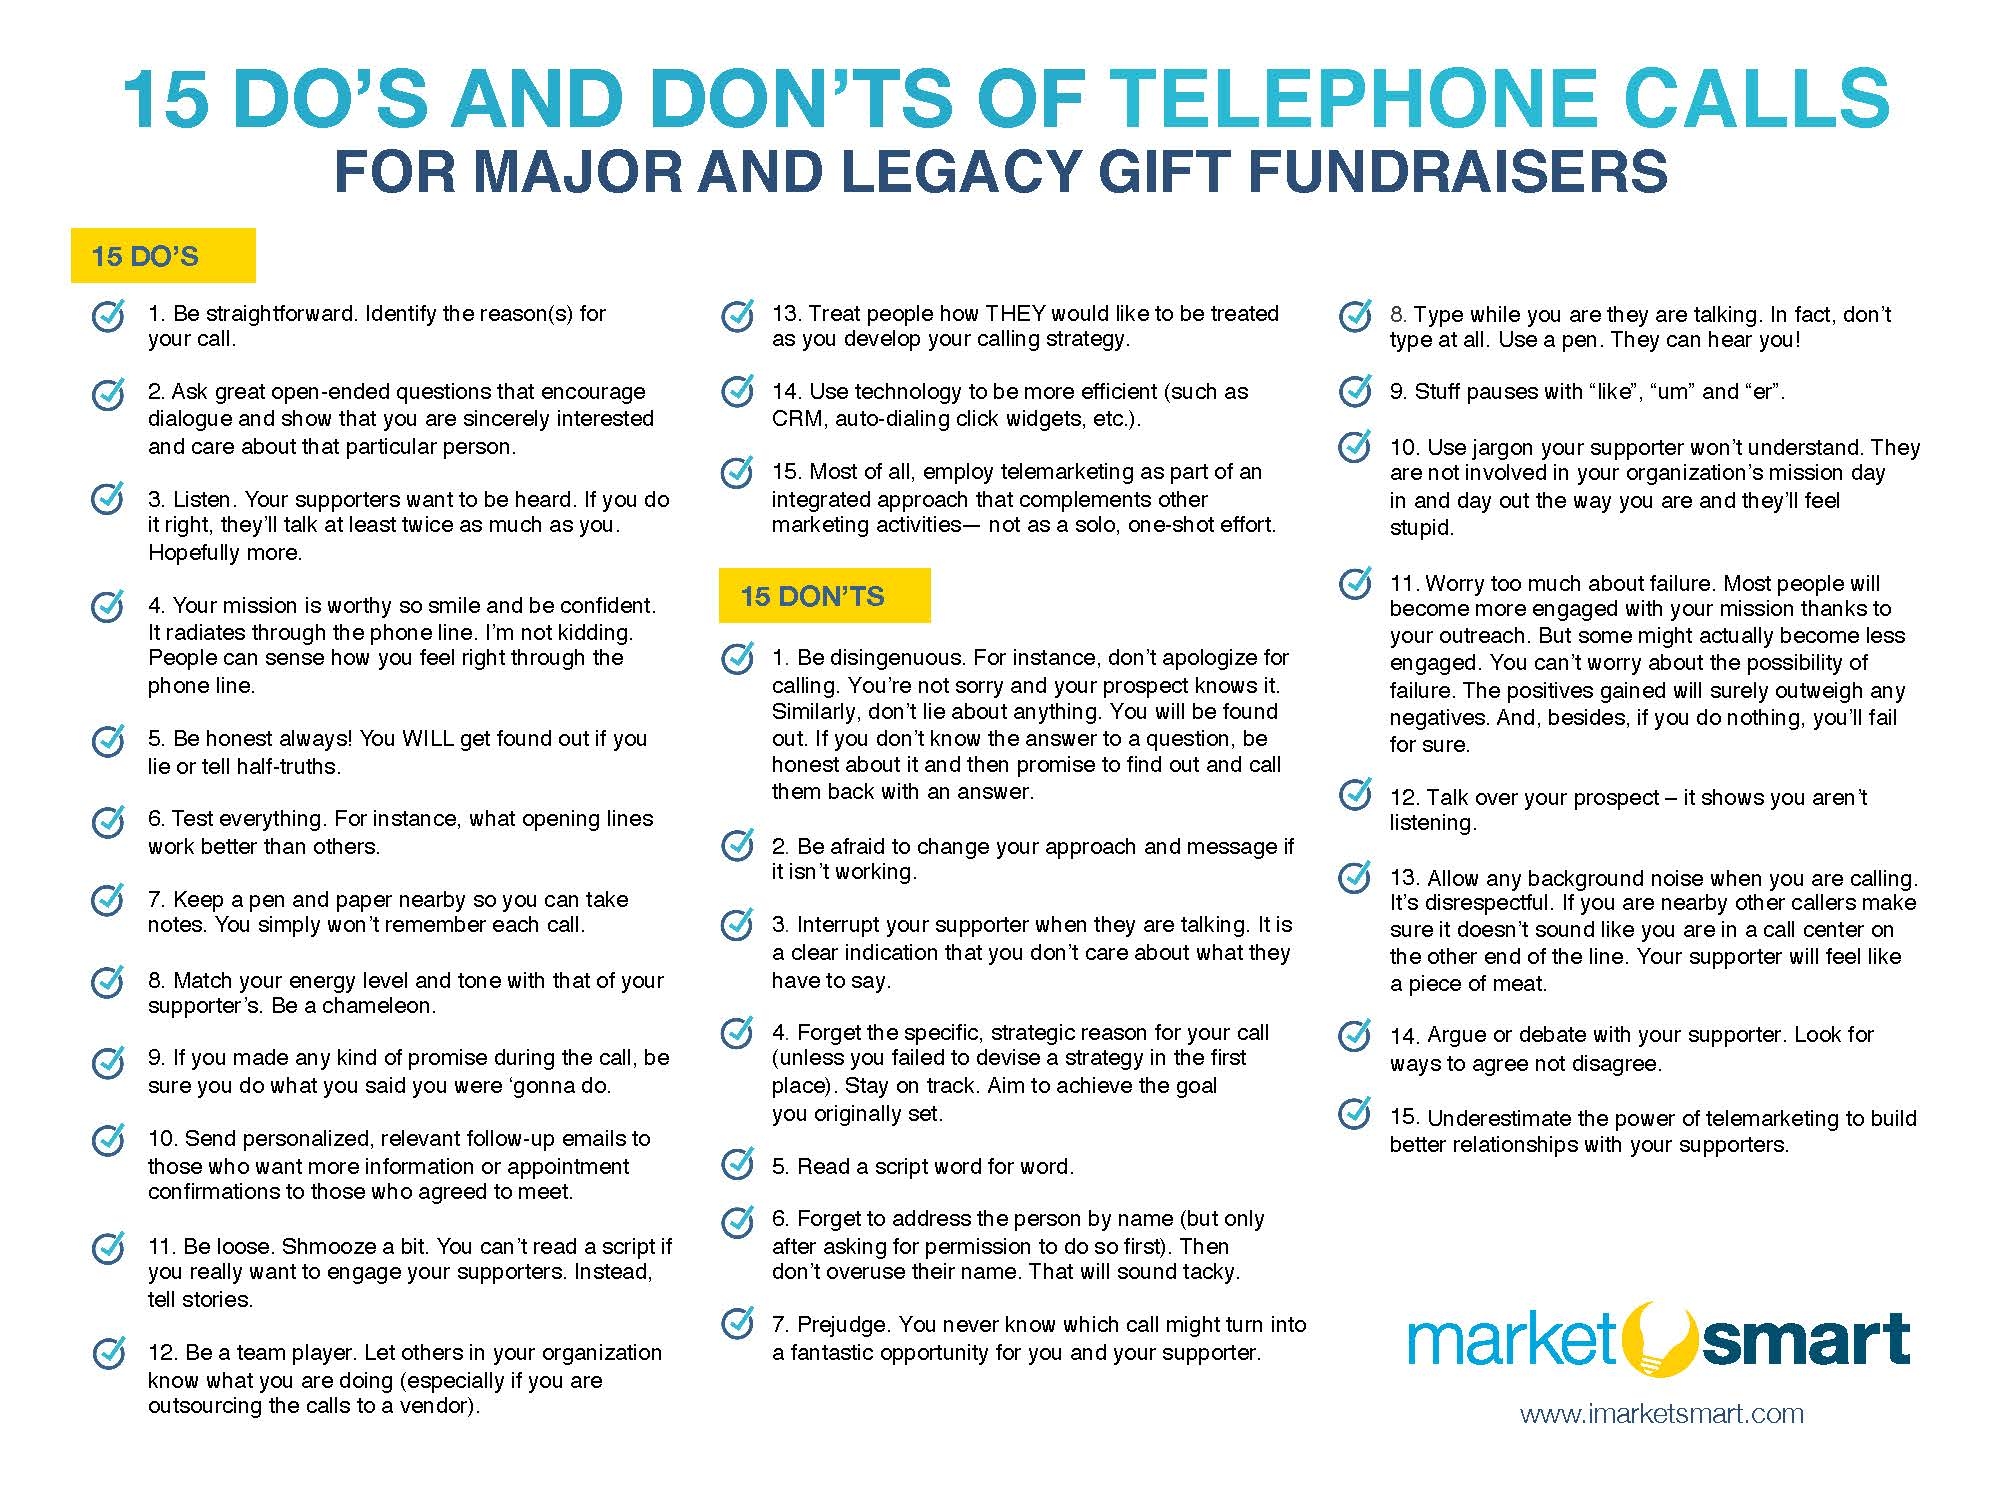 15 do's and don'ts for telemarketing major gifts